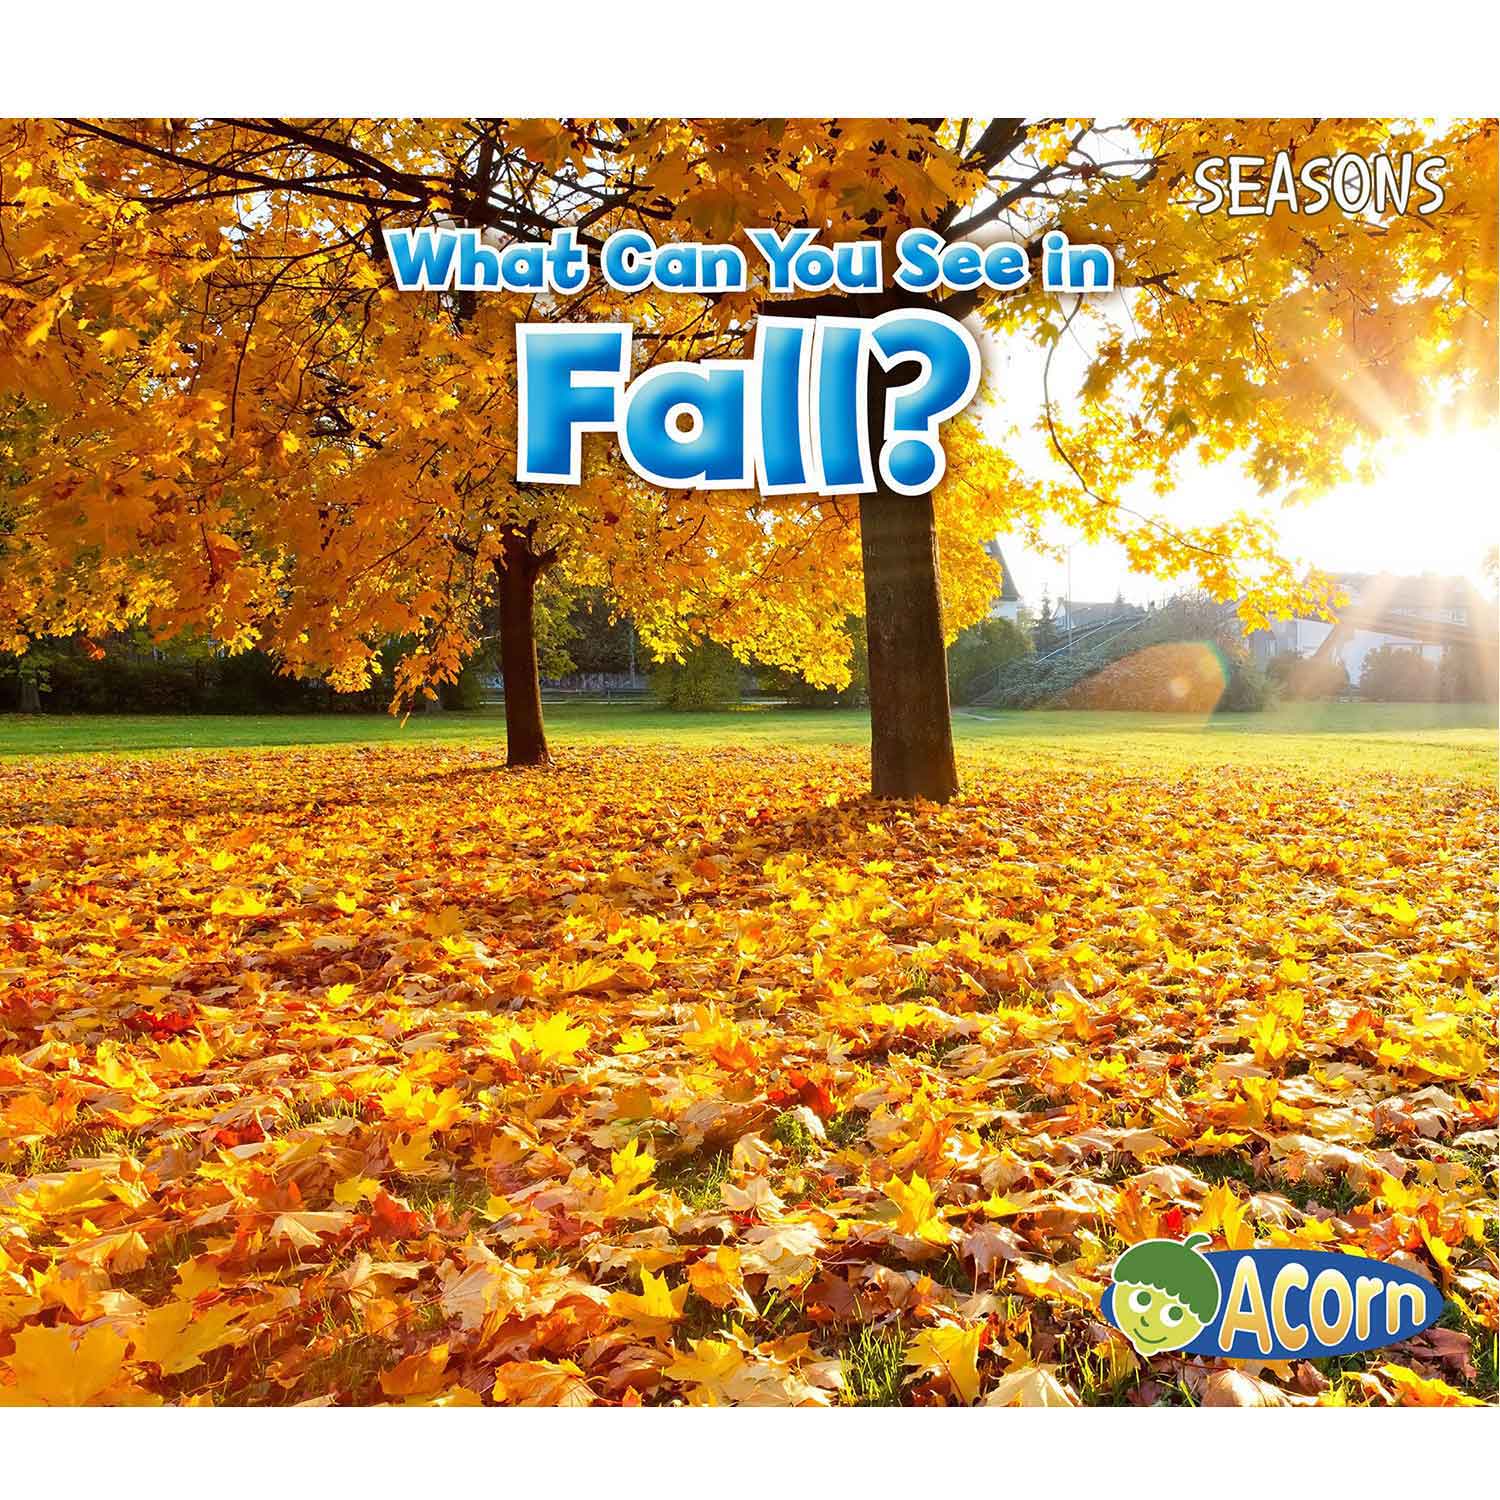 What Can You See in Fall?